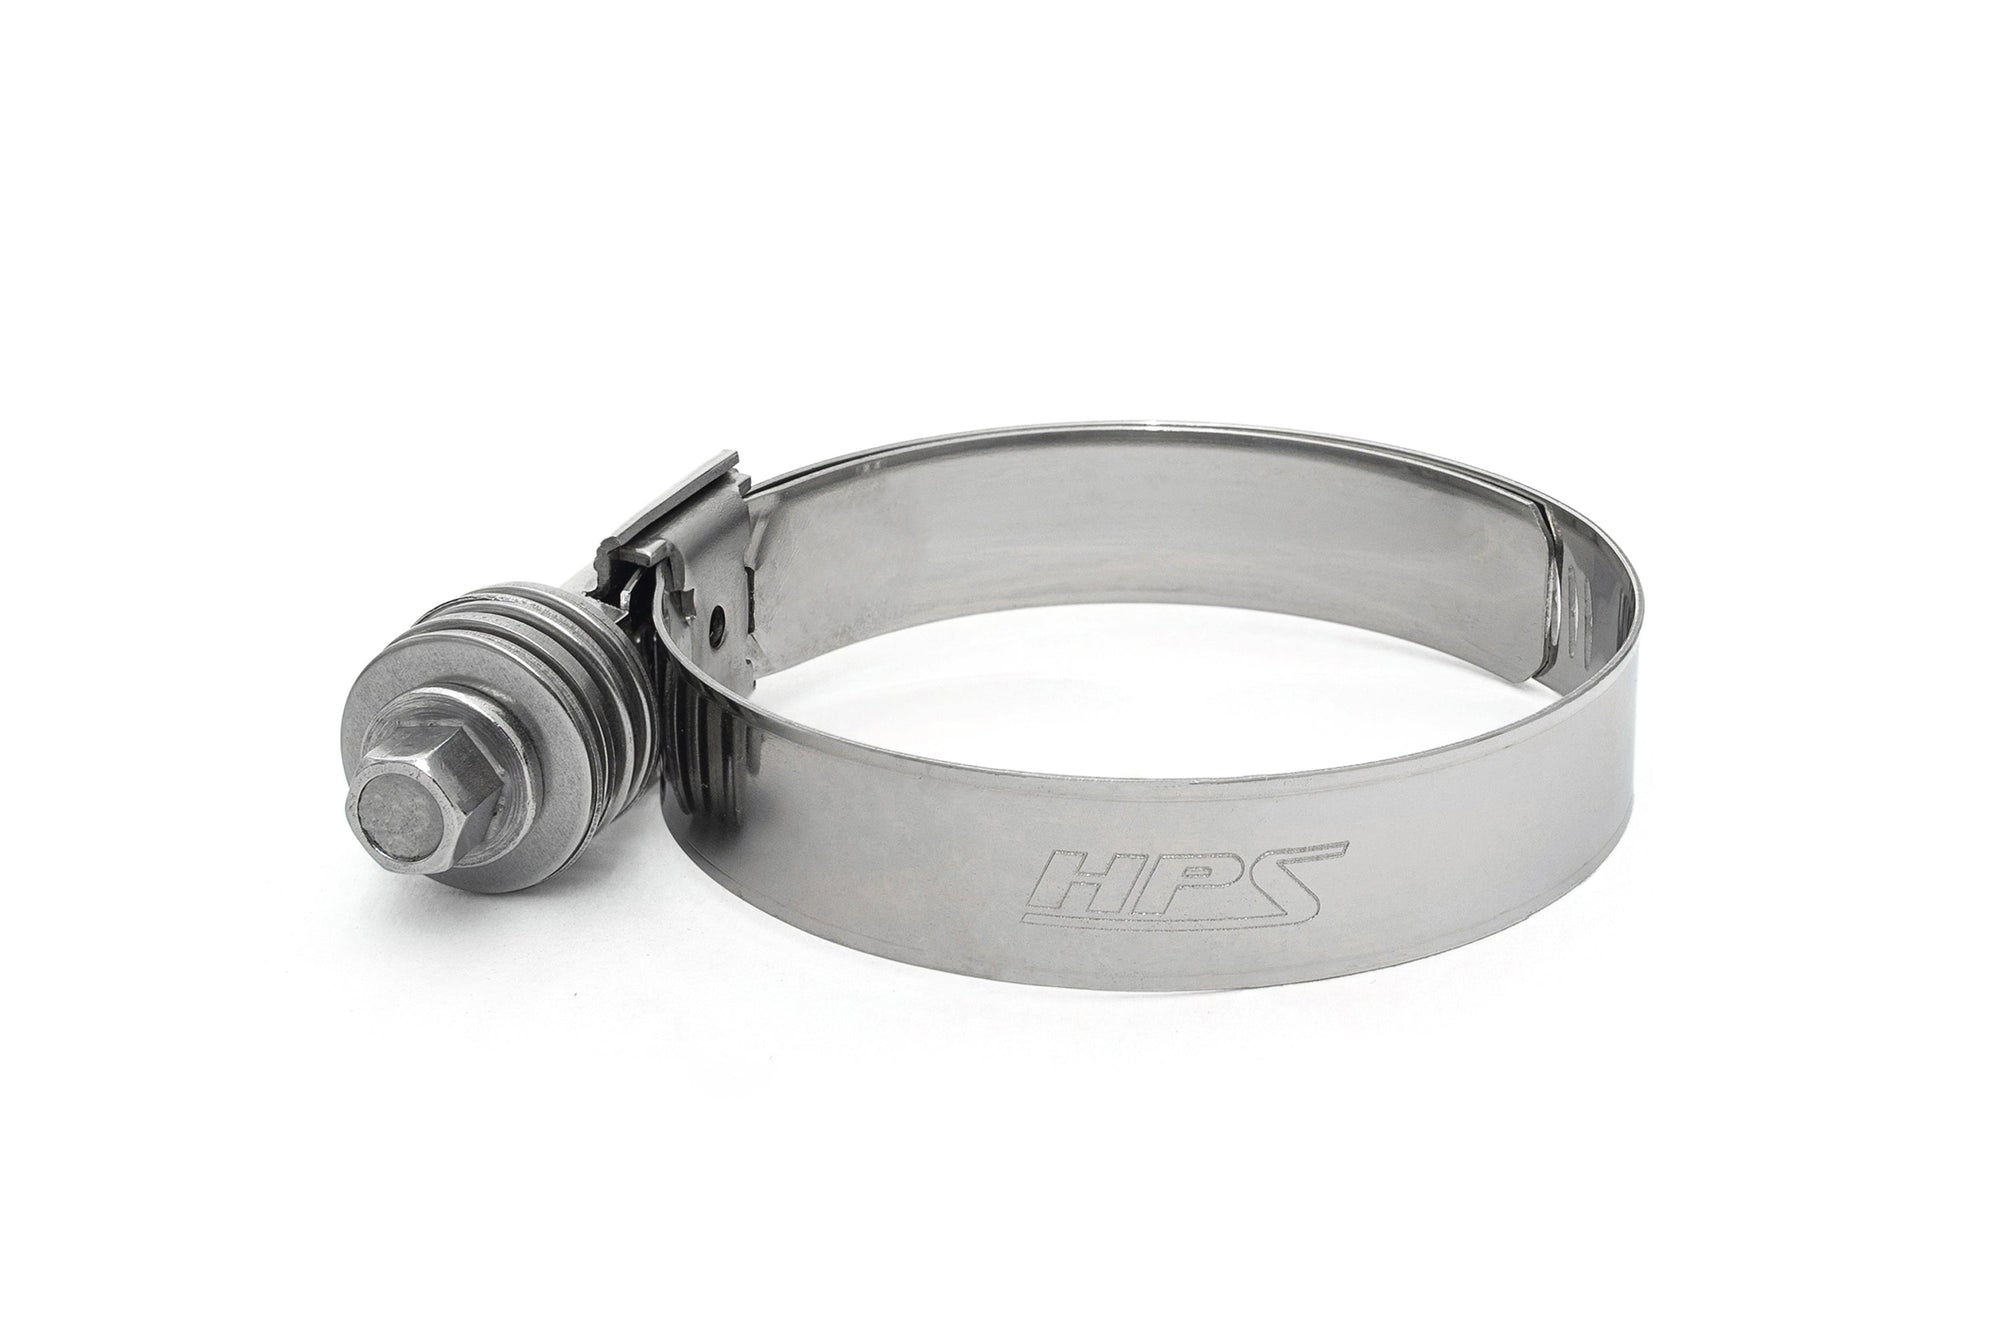 HPS Stainless Steel Heavy Duty Constant Tension Hose Clamp CTHD-462 fits 4", 4-1/8" inch silicone hose charge air intake turbo cac intercooler pipe